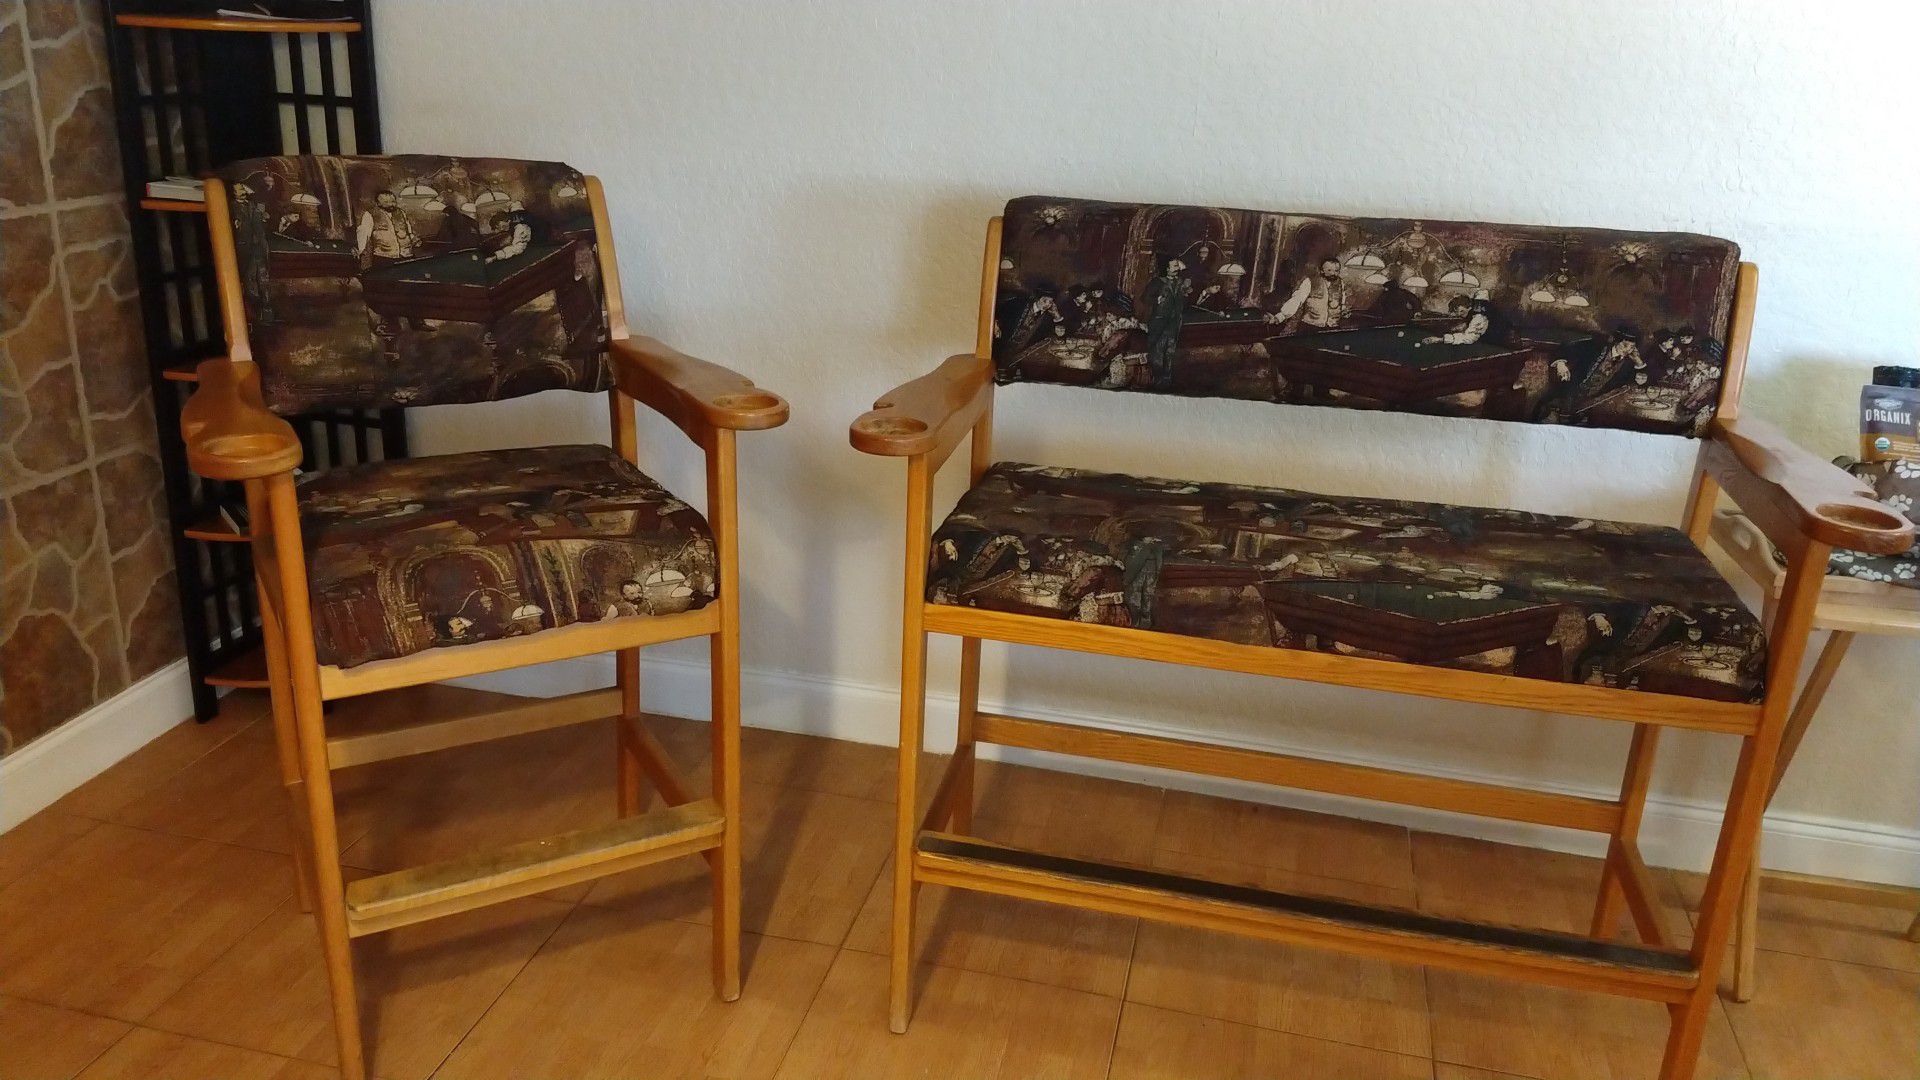 2 bench chairs